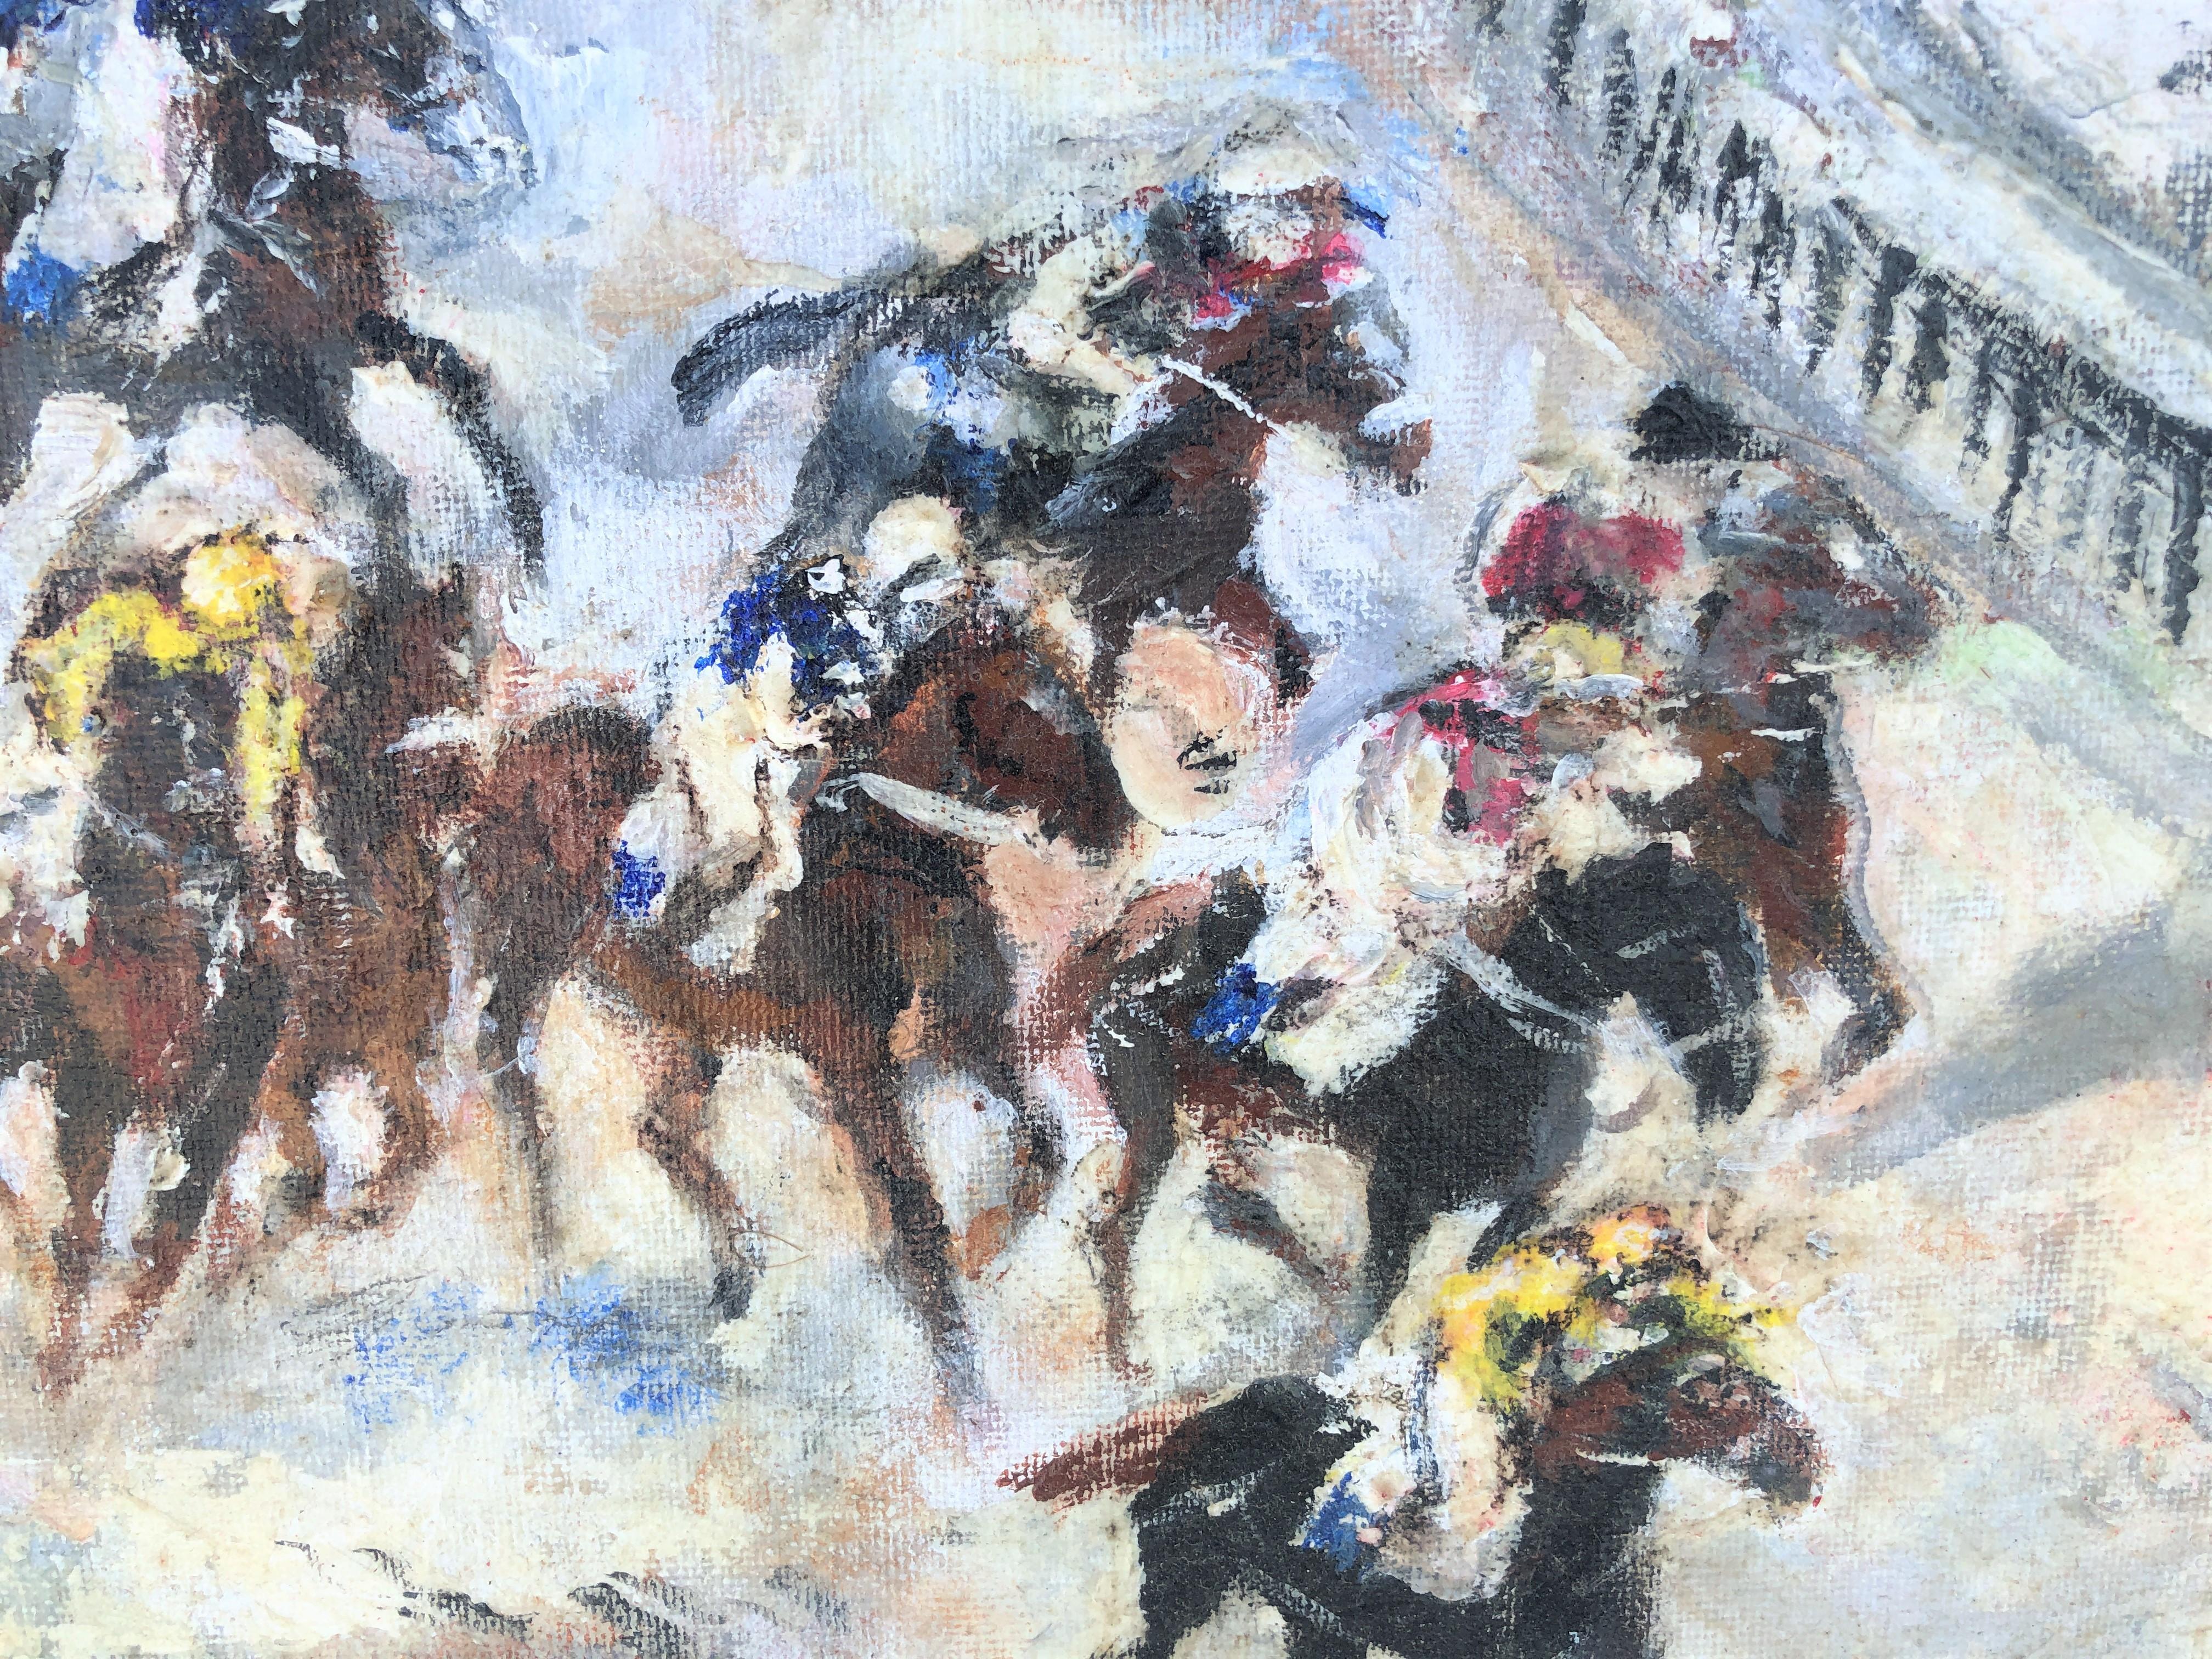 Horse race oil on canvas painting - Fauvist Painting by Jose Luis Florit Rodero